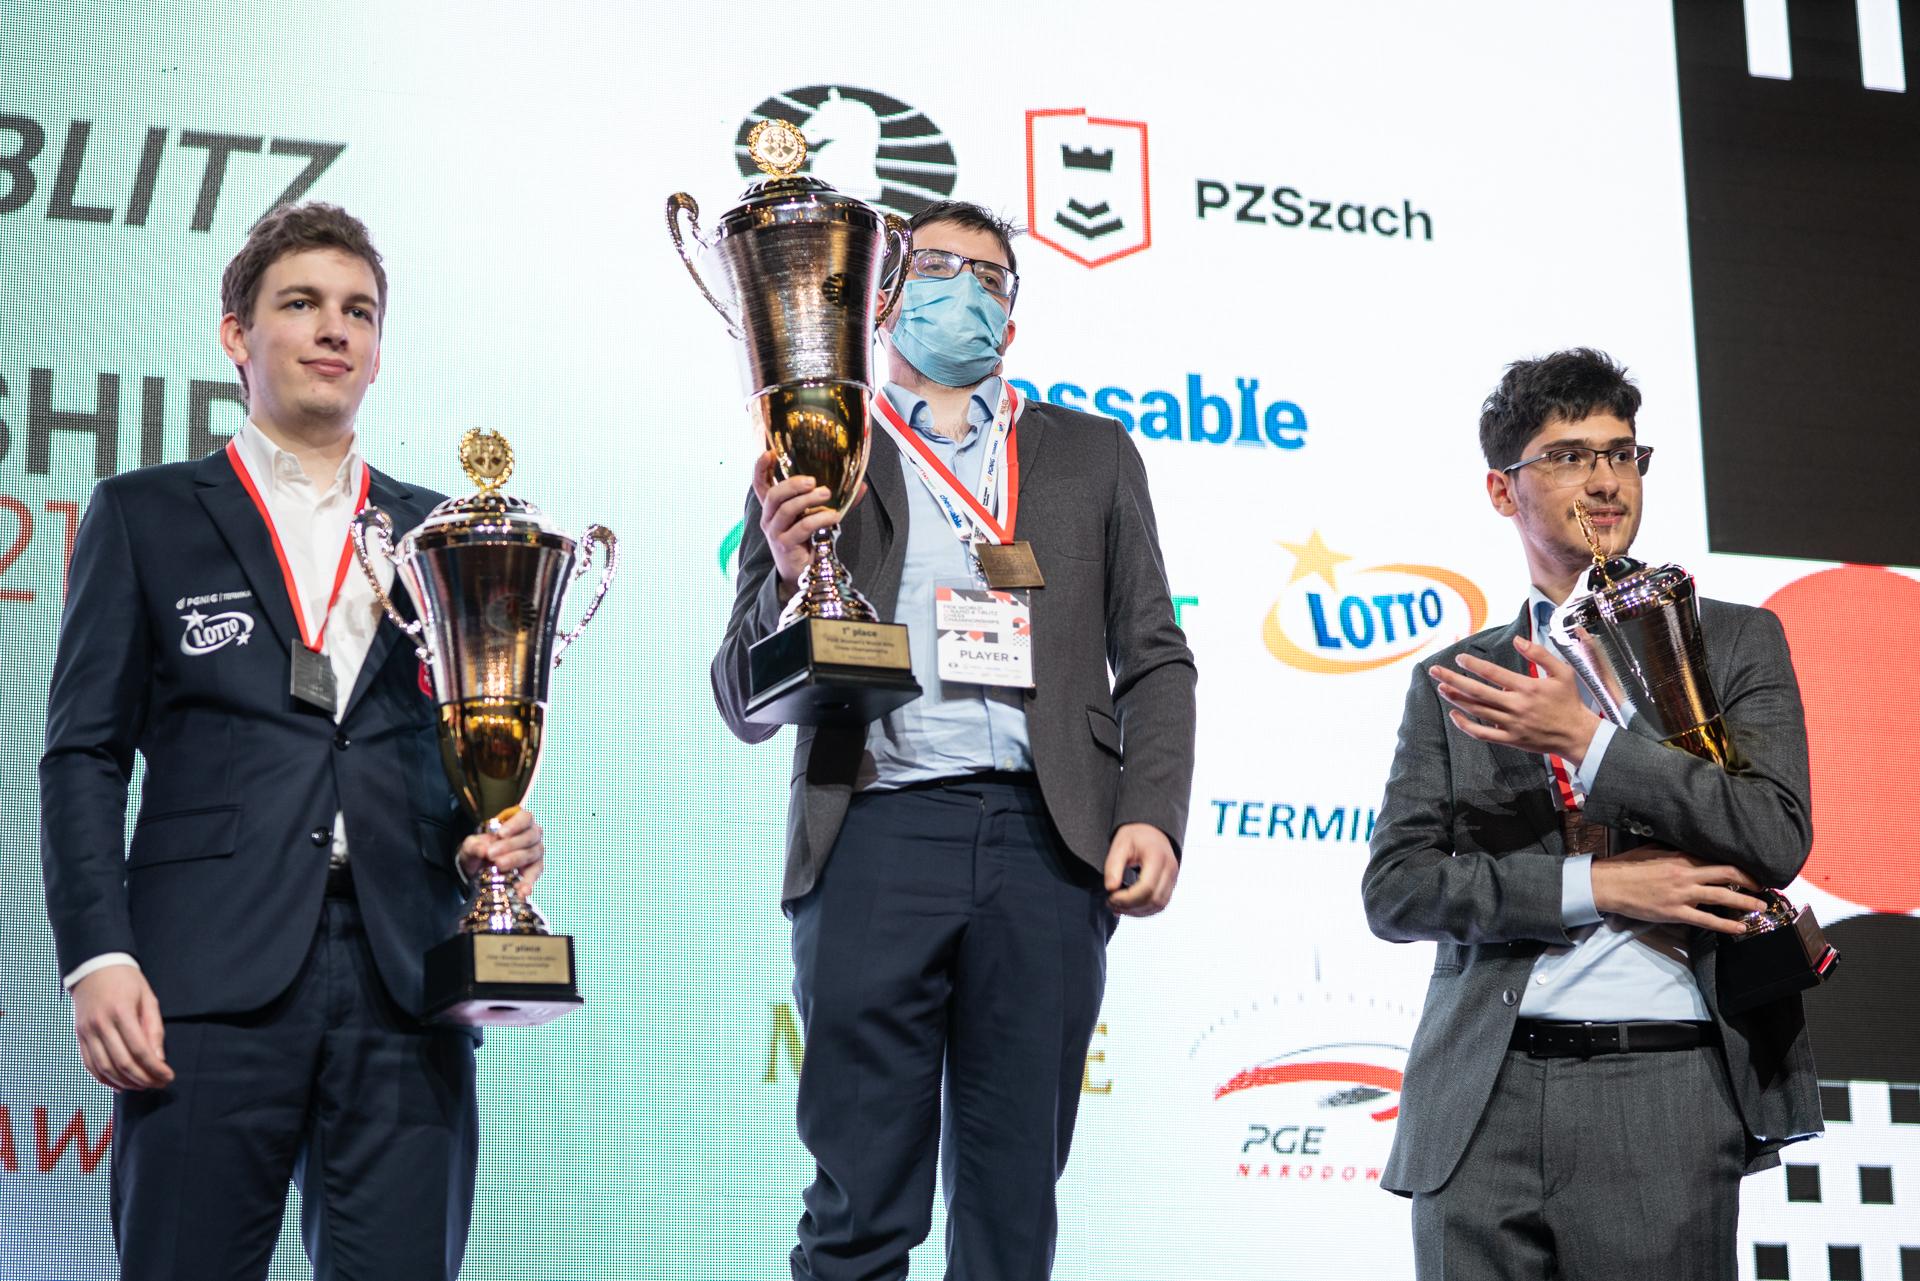 2700chess on X: 🇫🇷 Vachier-Lagrave (2813.6 +26.6, World #4 ↑8) wins the  World Blitz Championship with 15/21 after beating Duda 2-1 on tie-breaks   📷 via    / X